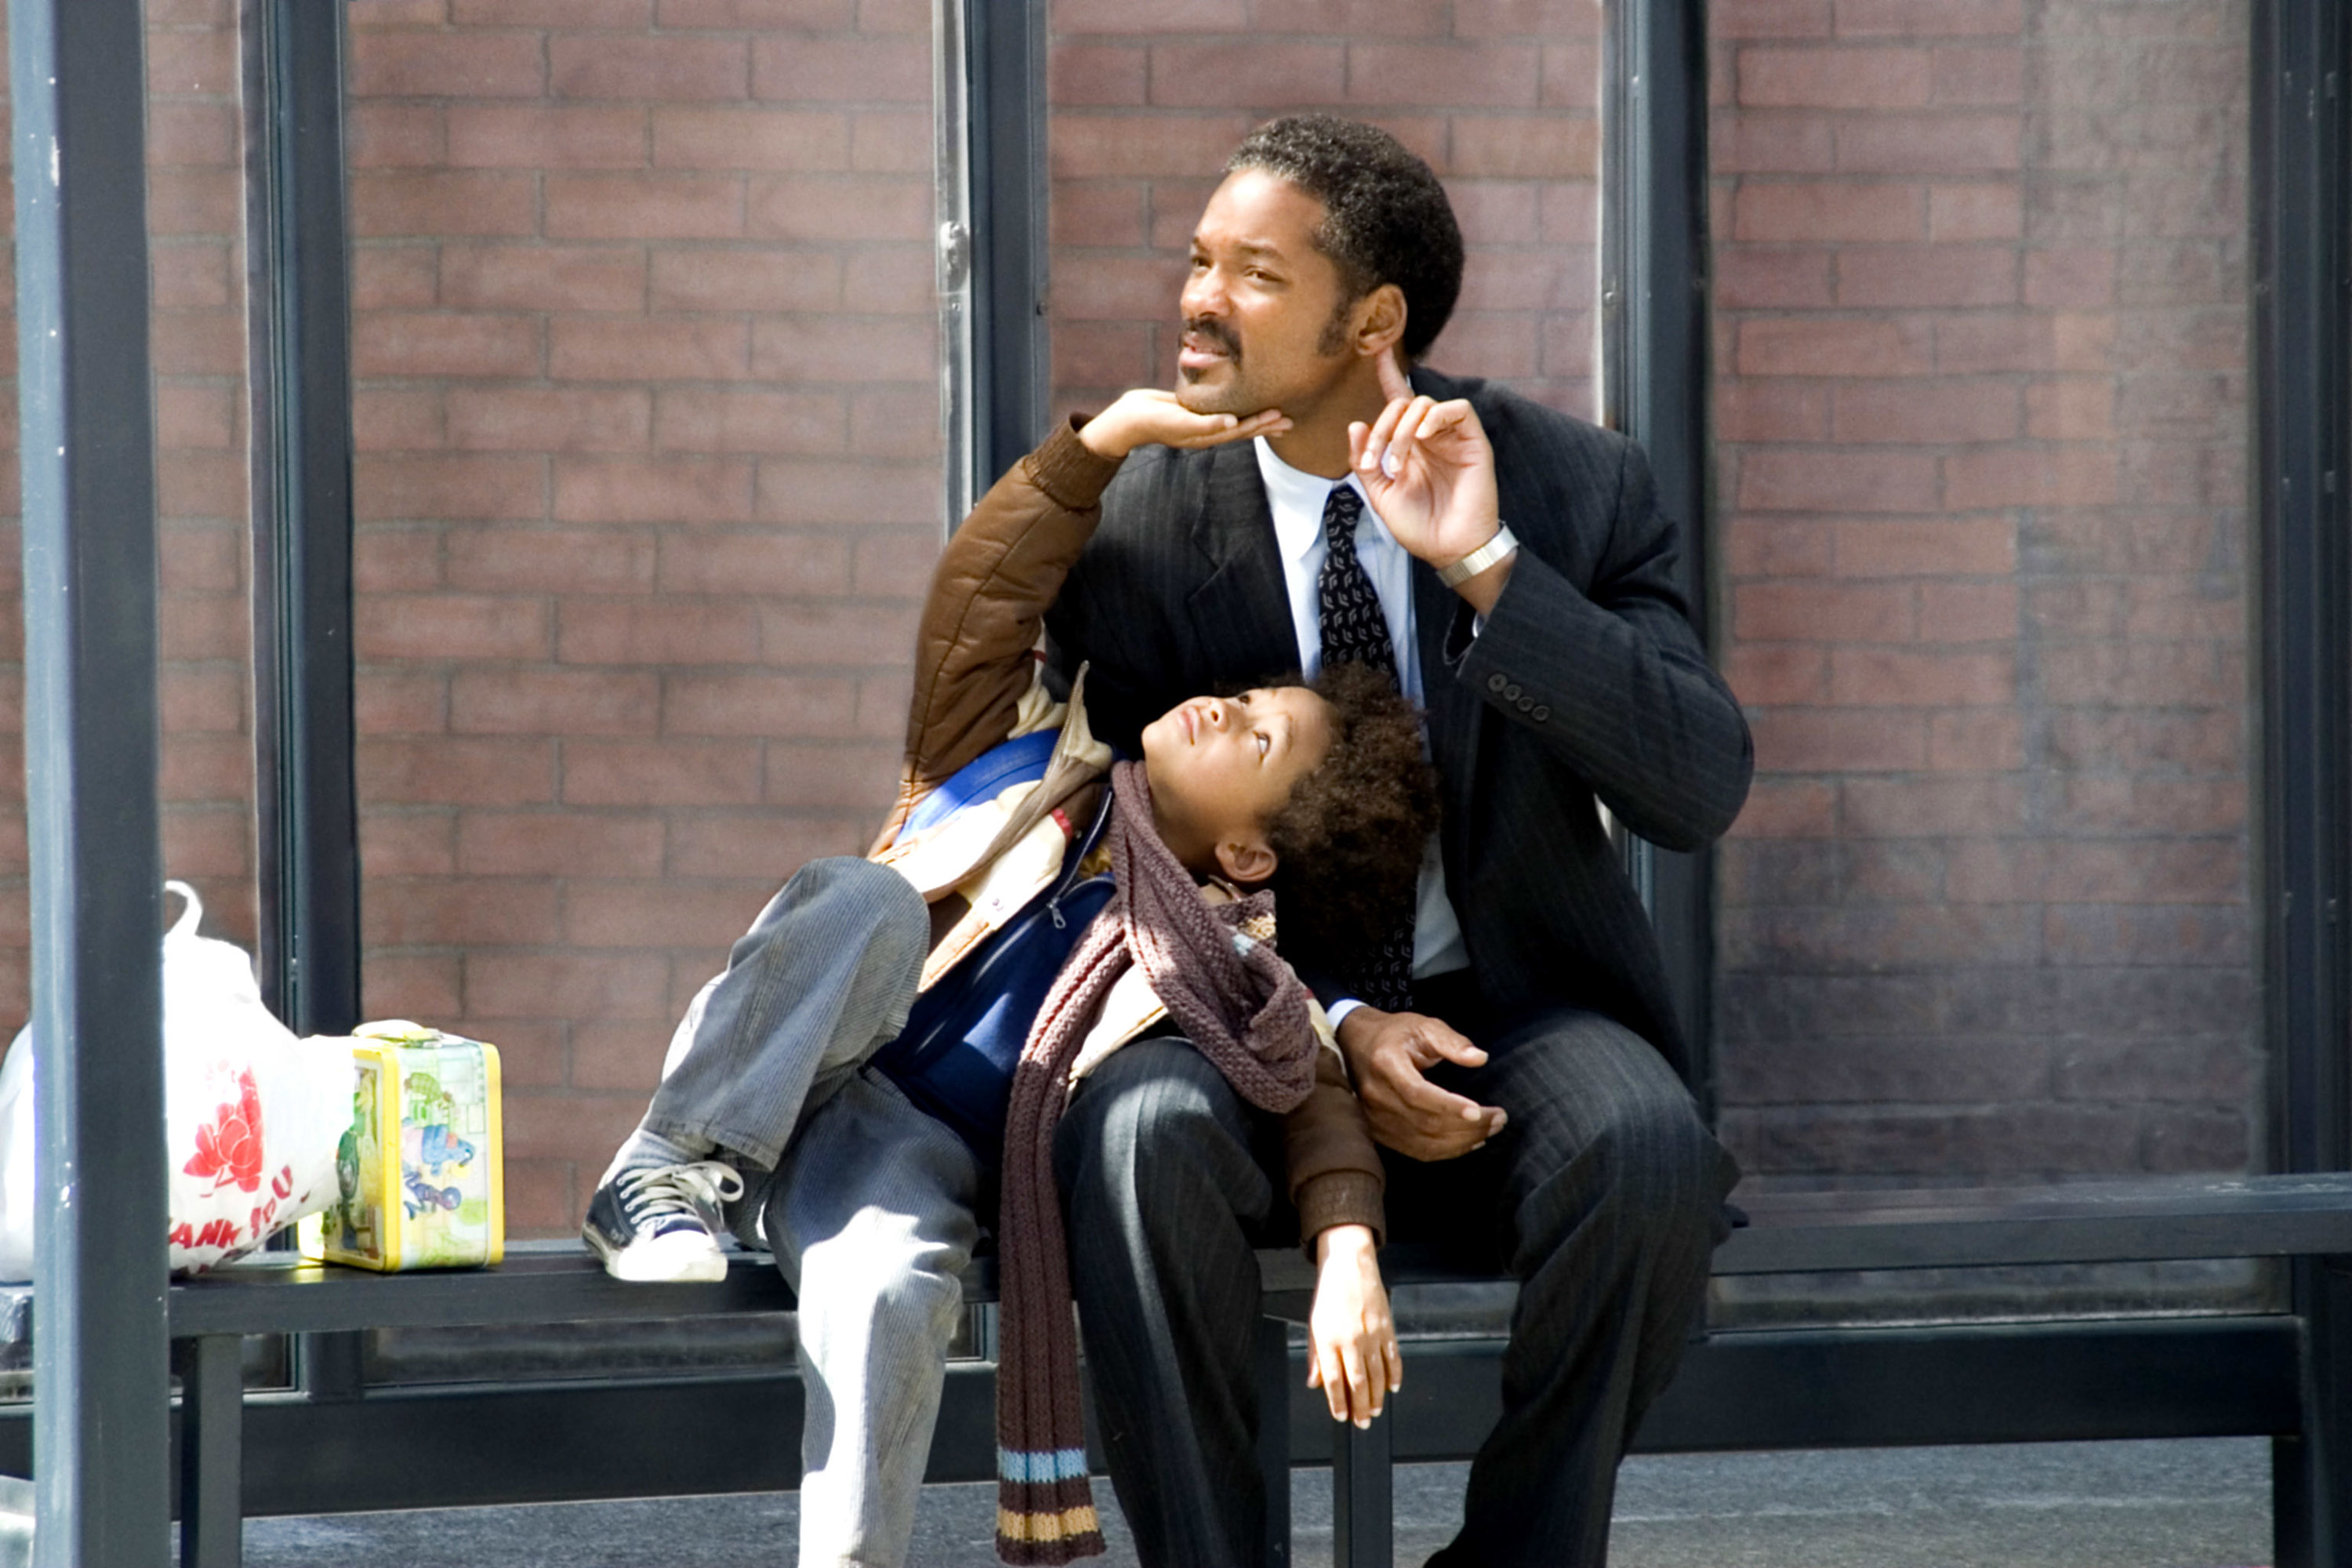 jadan and will sitting outside in a scene from the movie